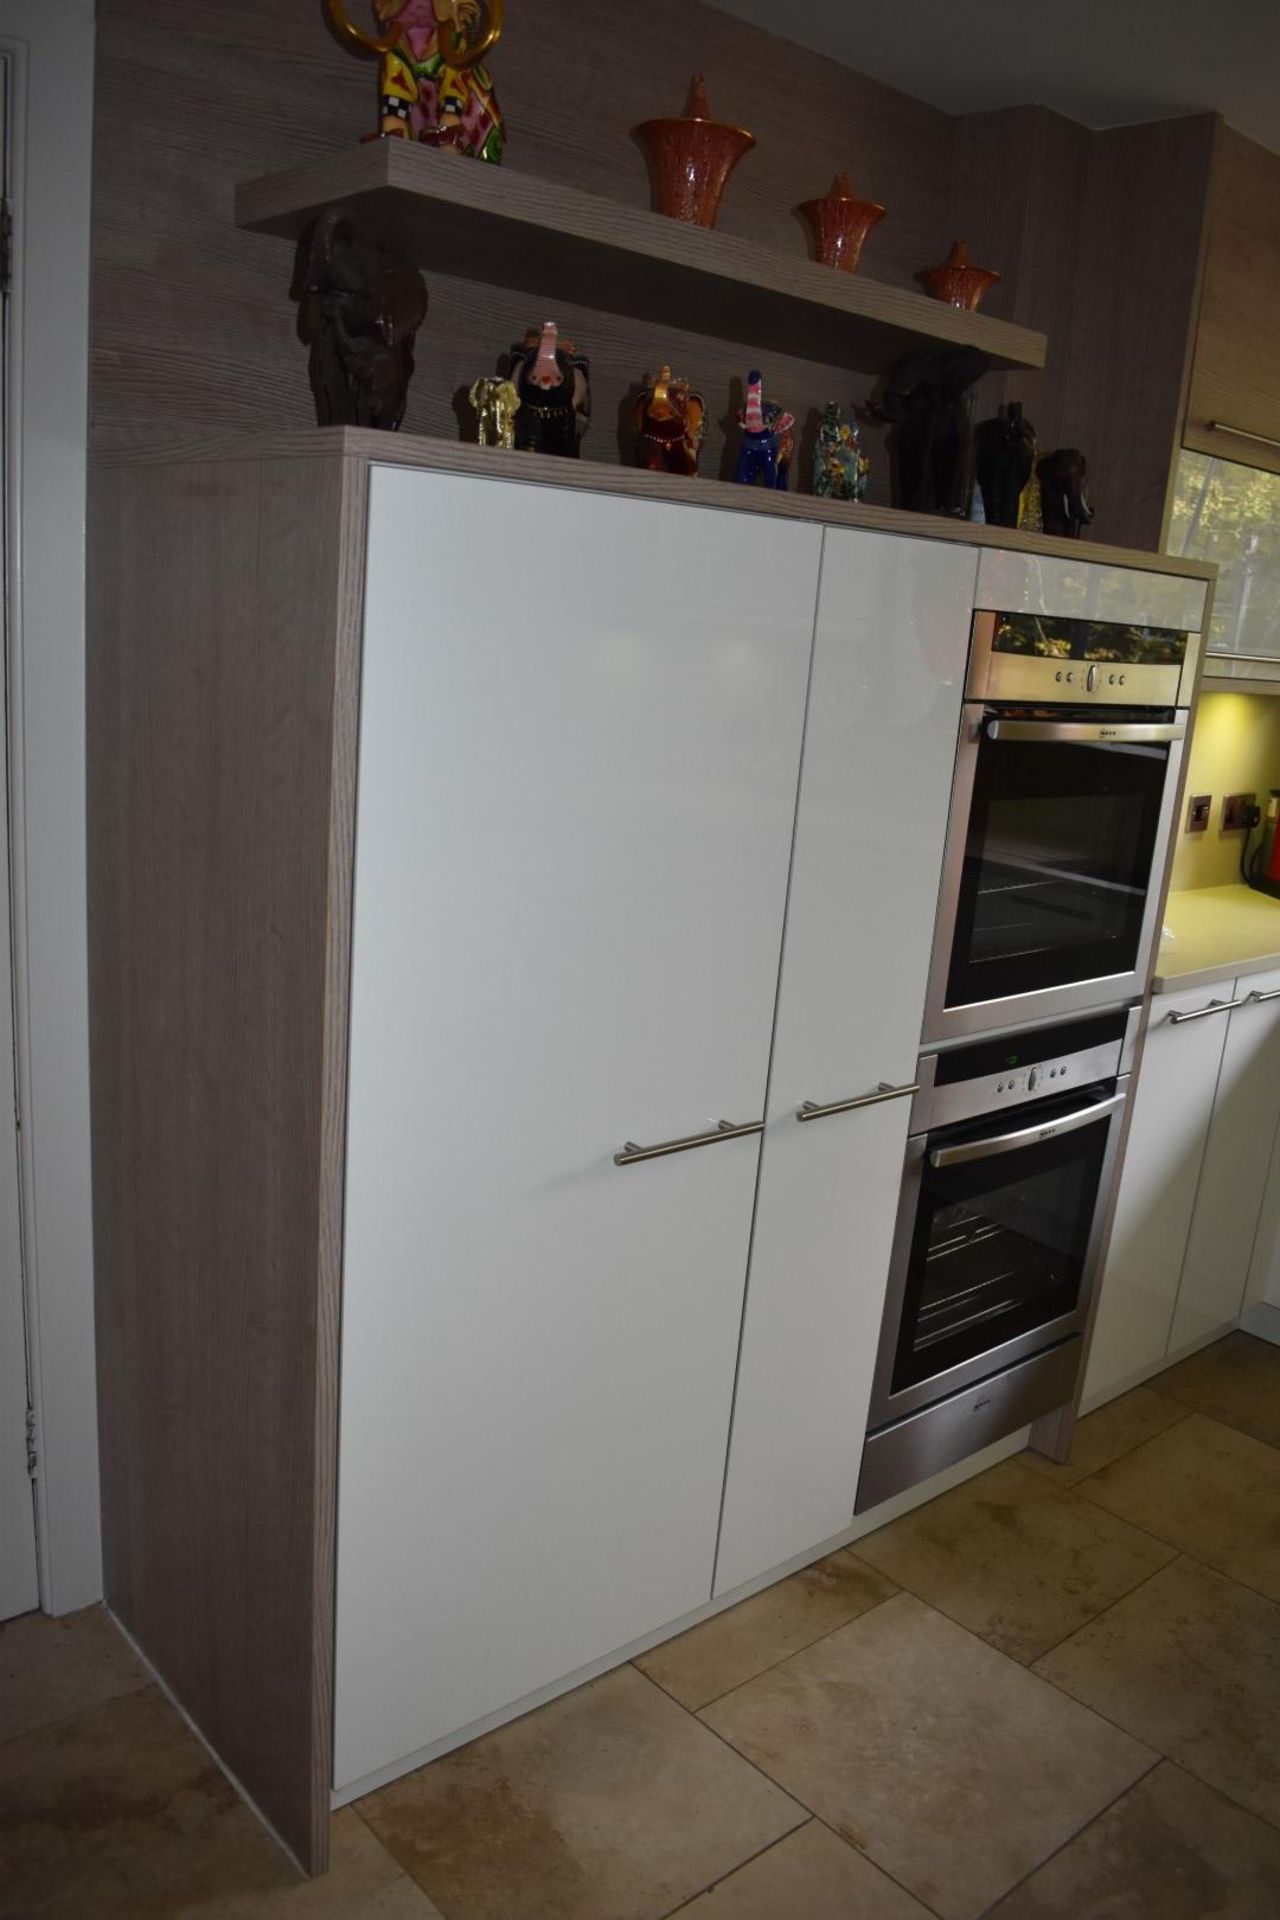 1 x Pronorm Einbauküchen German Made Fitted Kitchen With Contemporary High Gloss Cream Doors and - Image 36 of 51